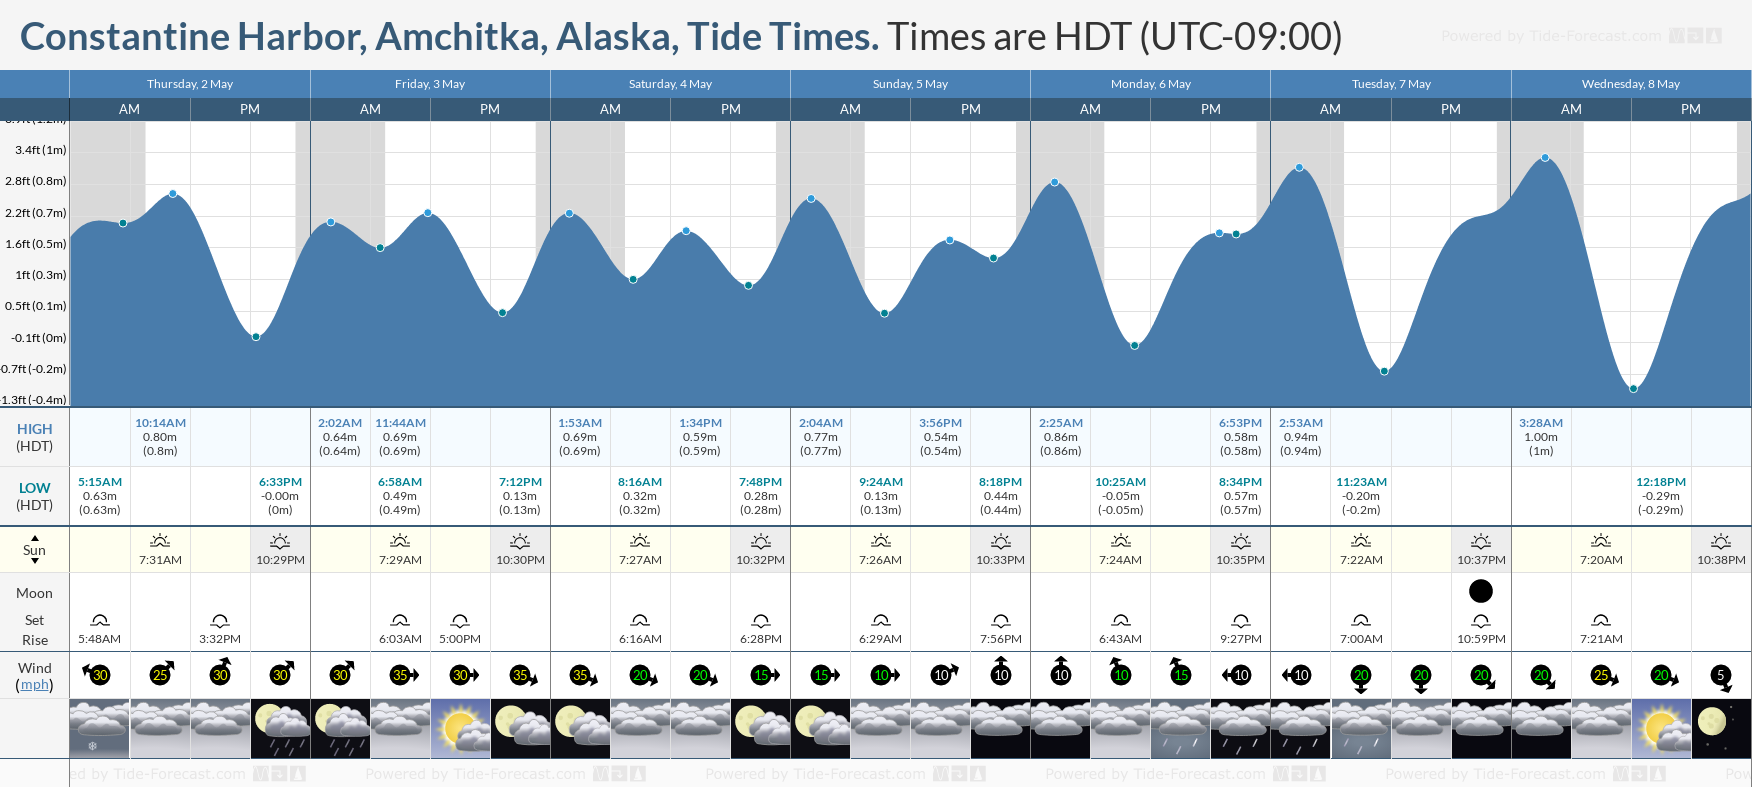 Constantine Harbor, Amchitka, Alaska Tide Chart including high and low tide tide times for the next 7 days